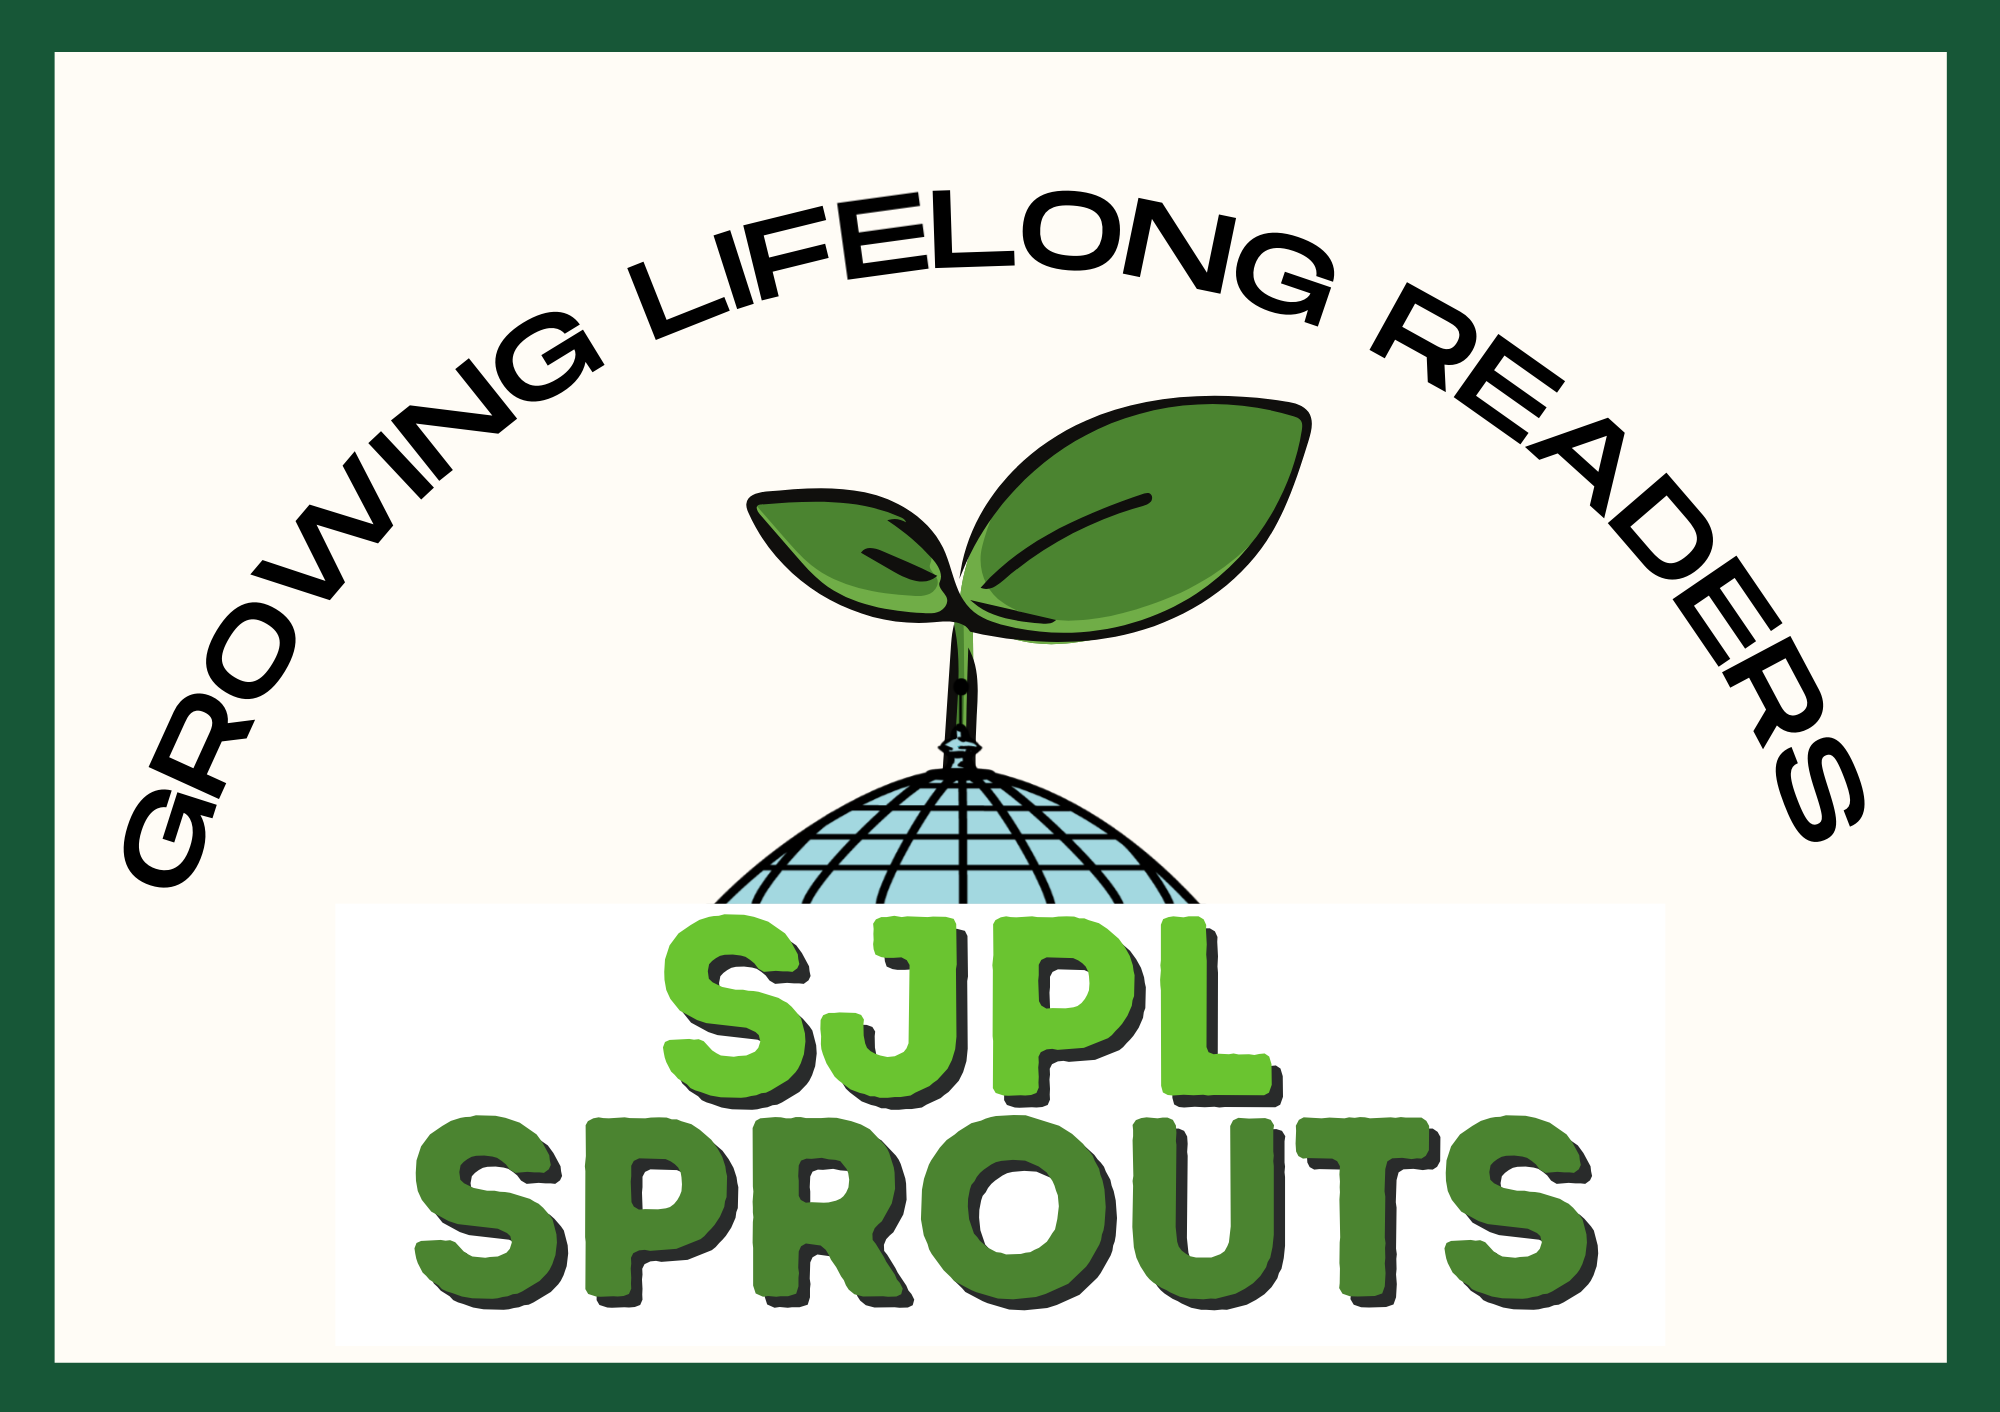 Growing lifelong readers, SJPL Sprouts Fridays at 10AM on Youtube